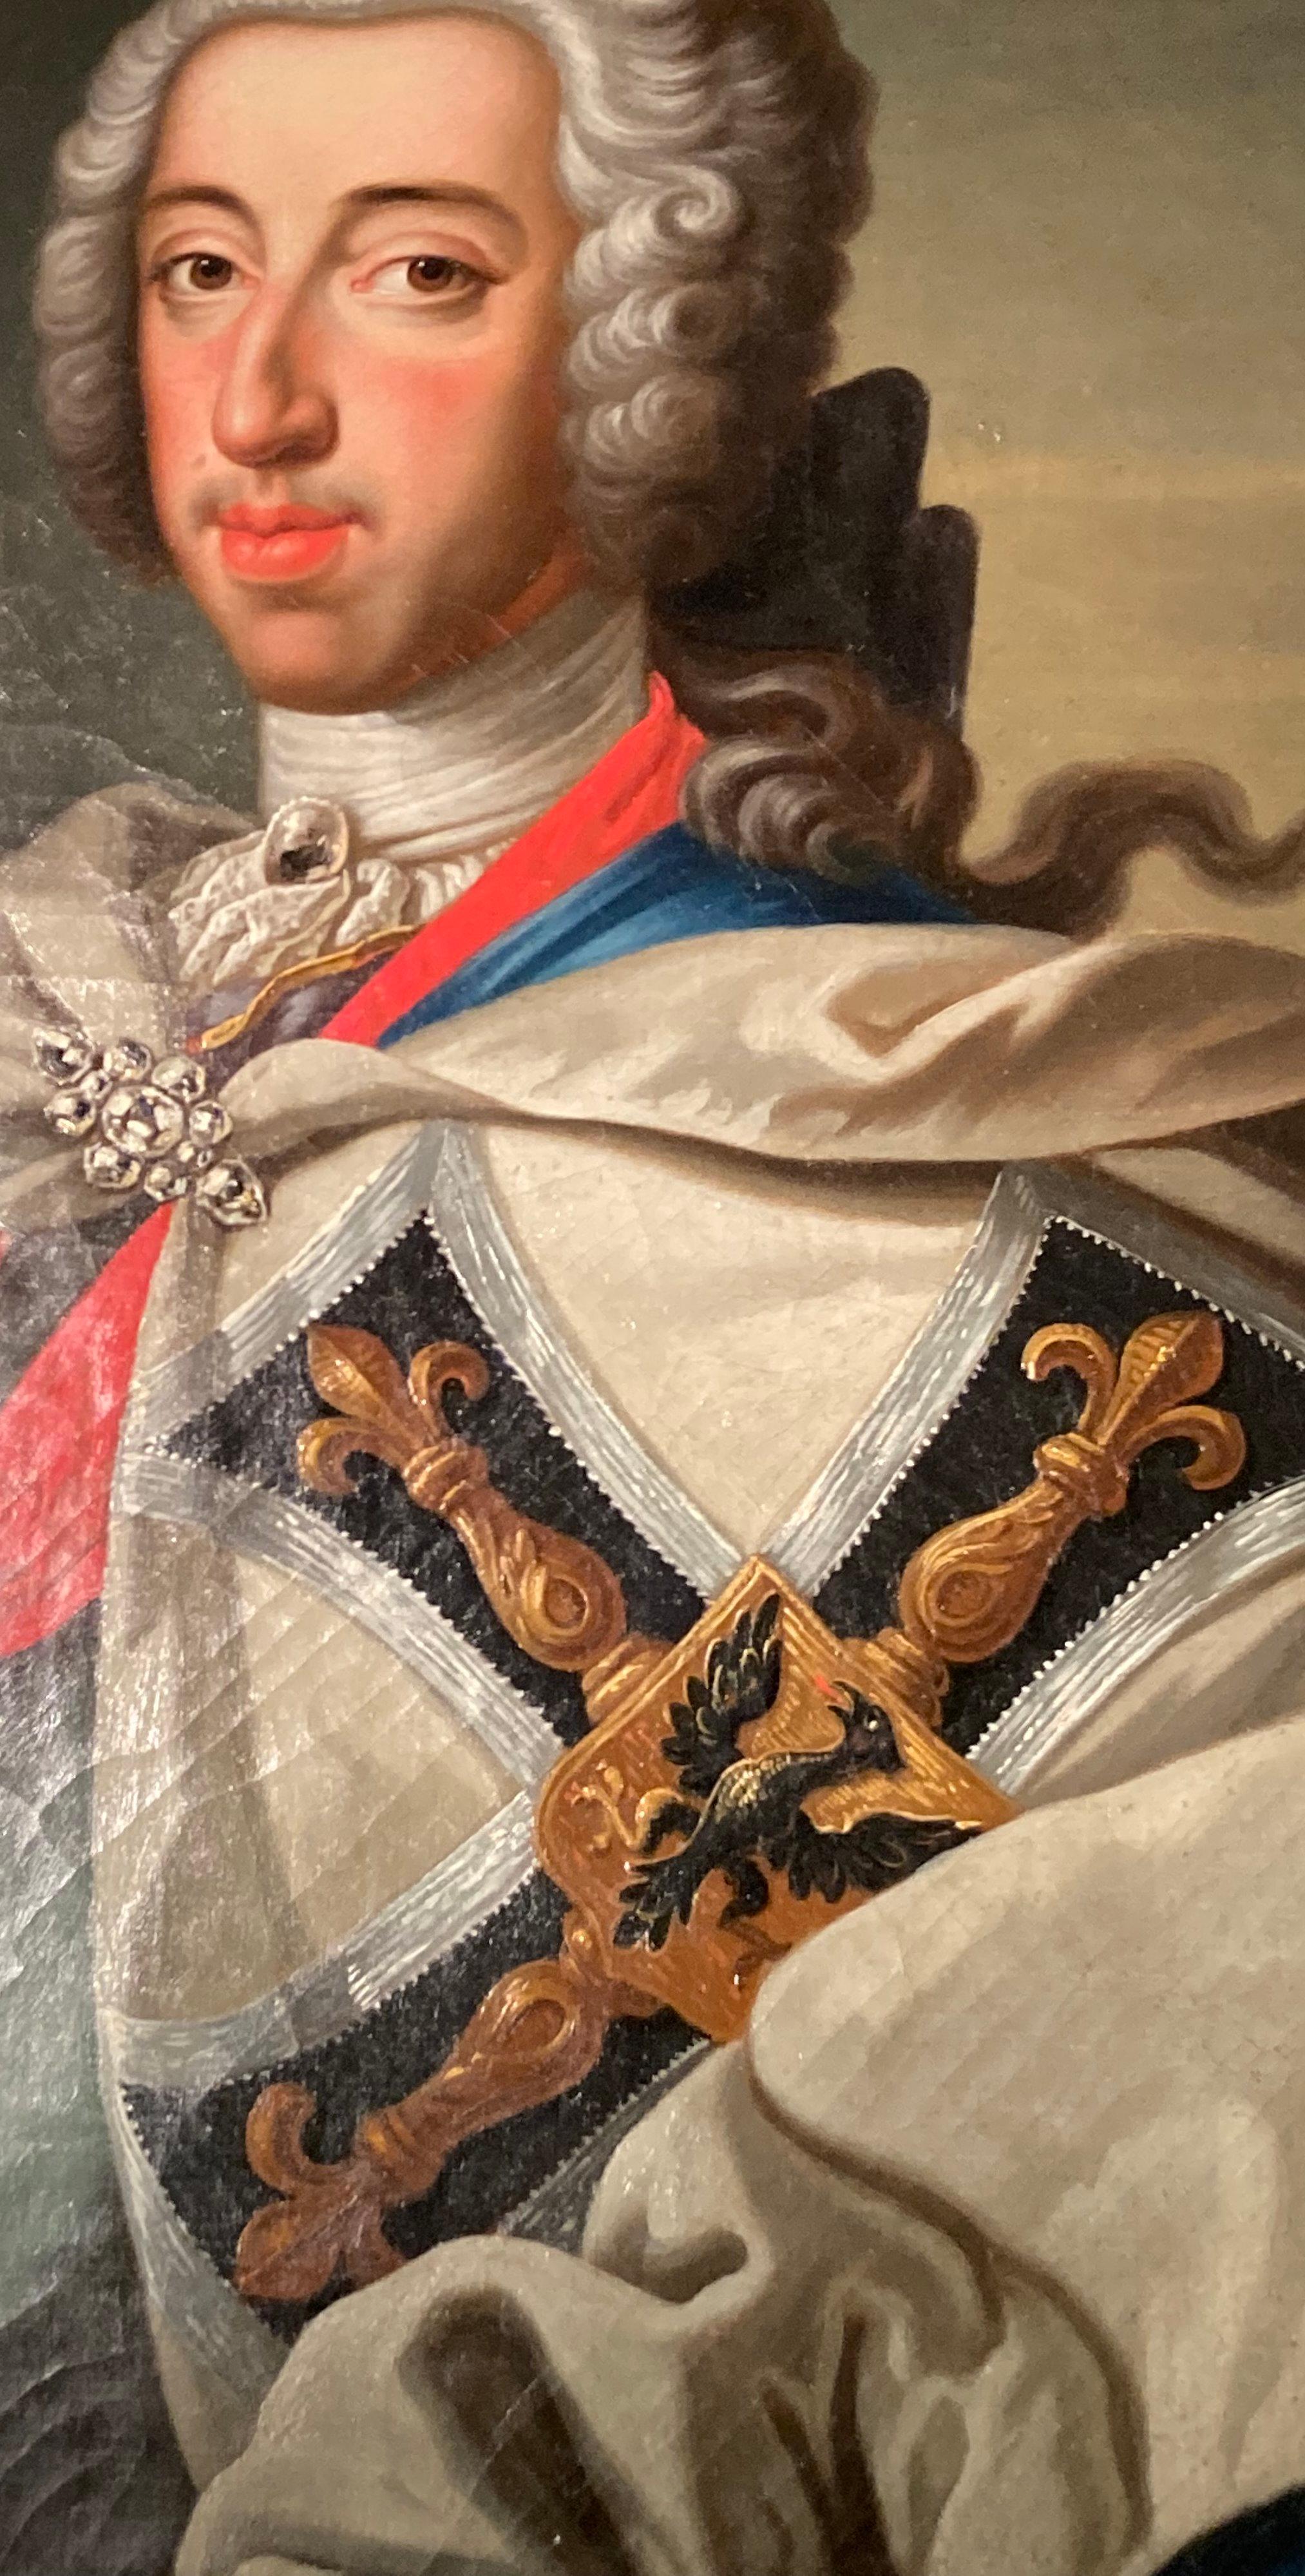 Clemens August Ferdinand Maria Hyazinth, Duke of Bavaria (* August 16, 1700 in Brussels; † February 6, 1761 in Koblenz) was as Clemens August I from 1723 to 1761 Archbishop of Cologne and thus at the same time Elector of the Holy Roman Empire,